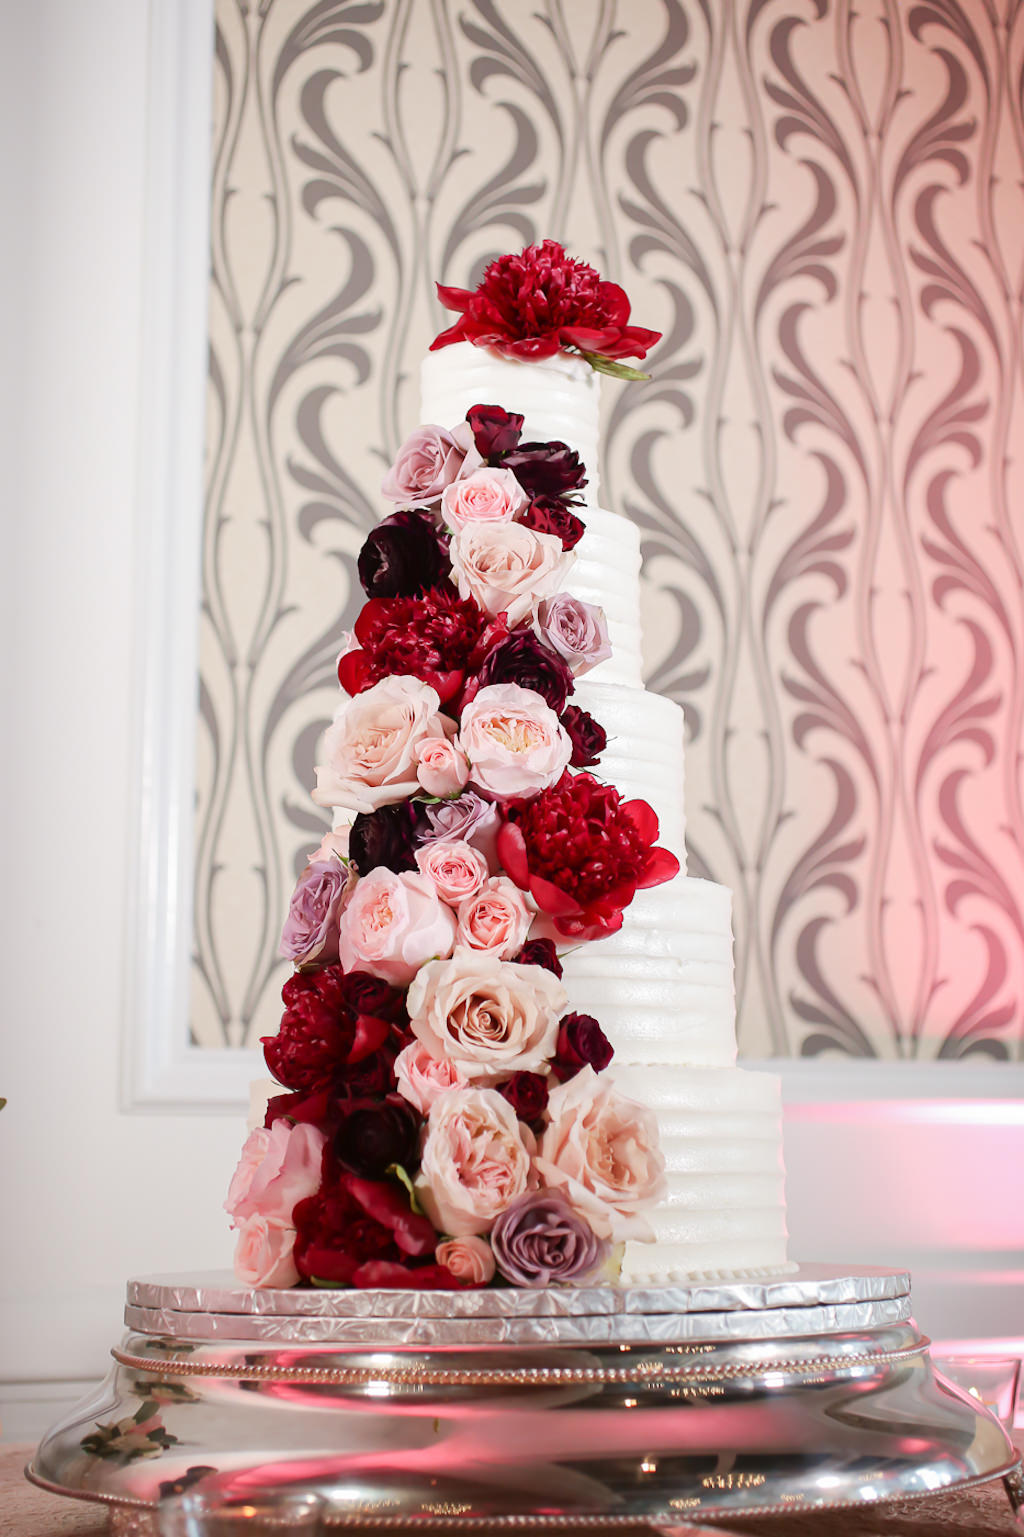 Romantic Five Tier White Wedding Cake with Blush Pink, Dusty Rose and Red Roses Cascading Flowers | Wedding Photographer Lifelong Photography Studios | Tampa Bay Wedding Planner Blue Skies Weddings and Events